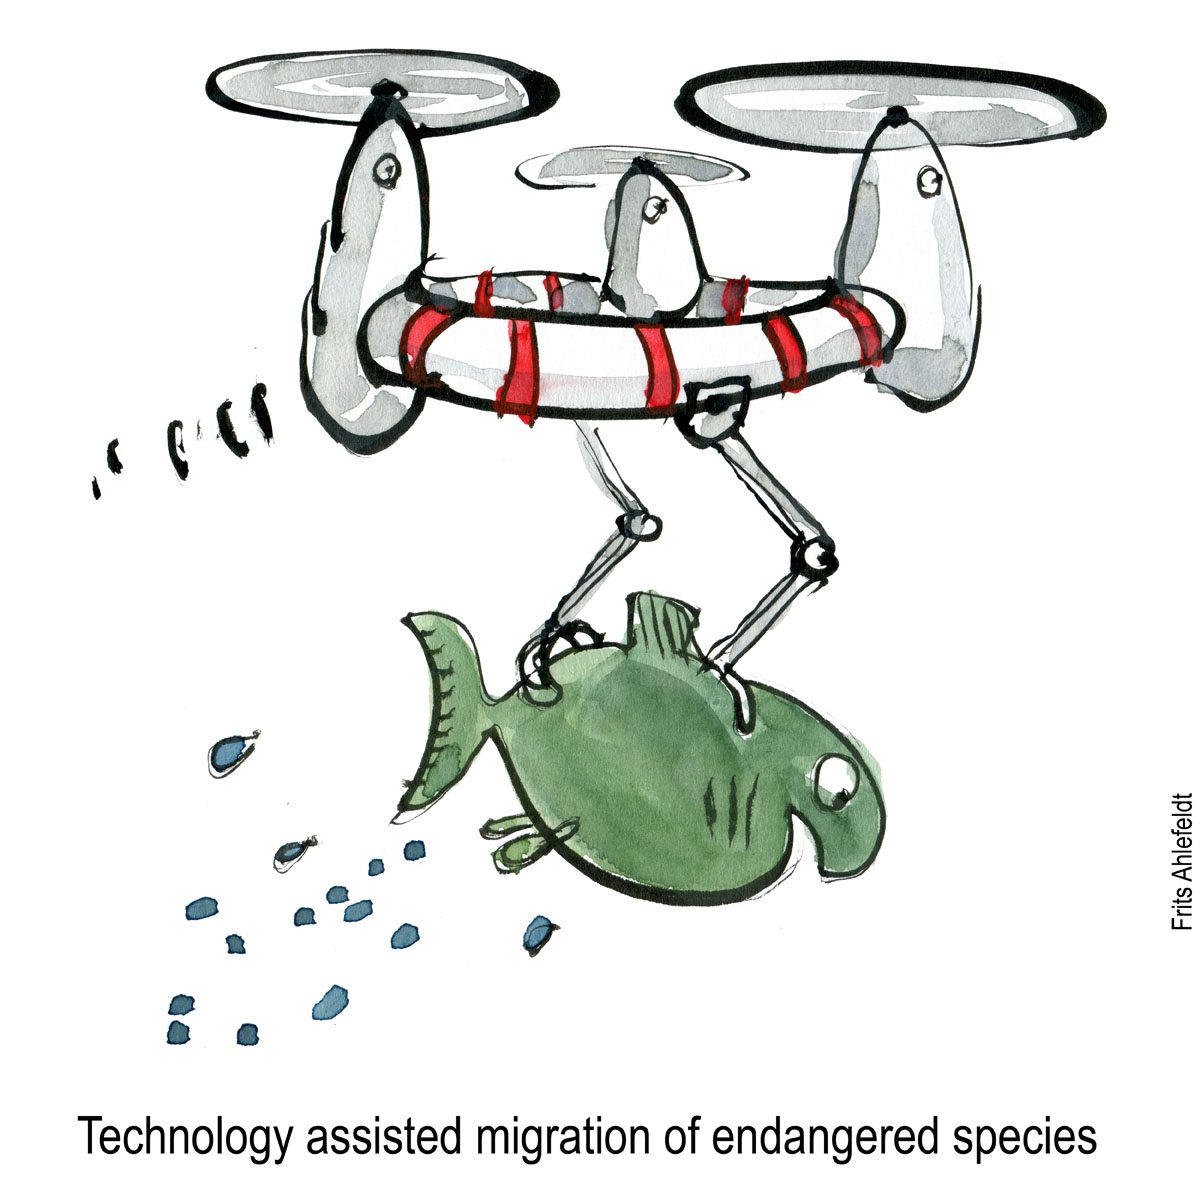 Drawing of drone flying with fish. Biodiversity illustration by Frits Ahlefeldt